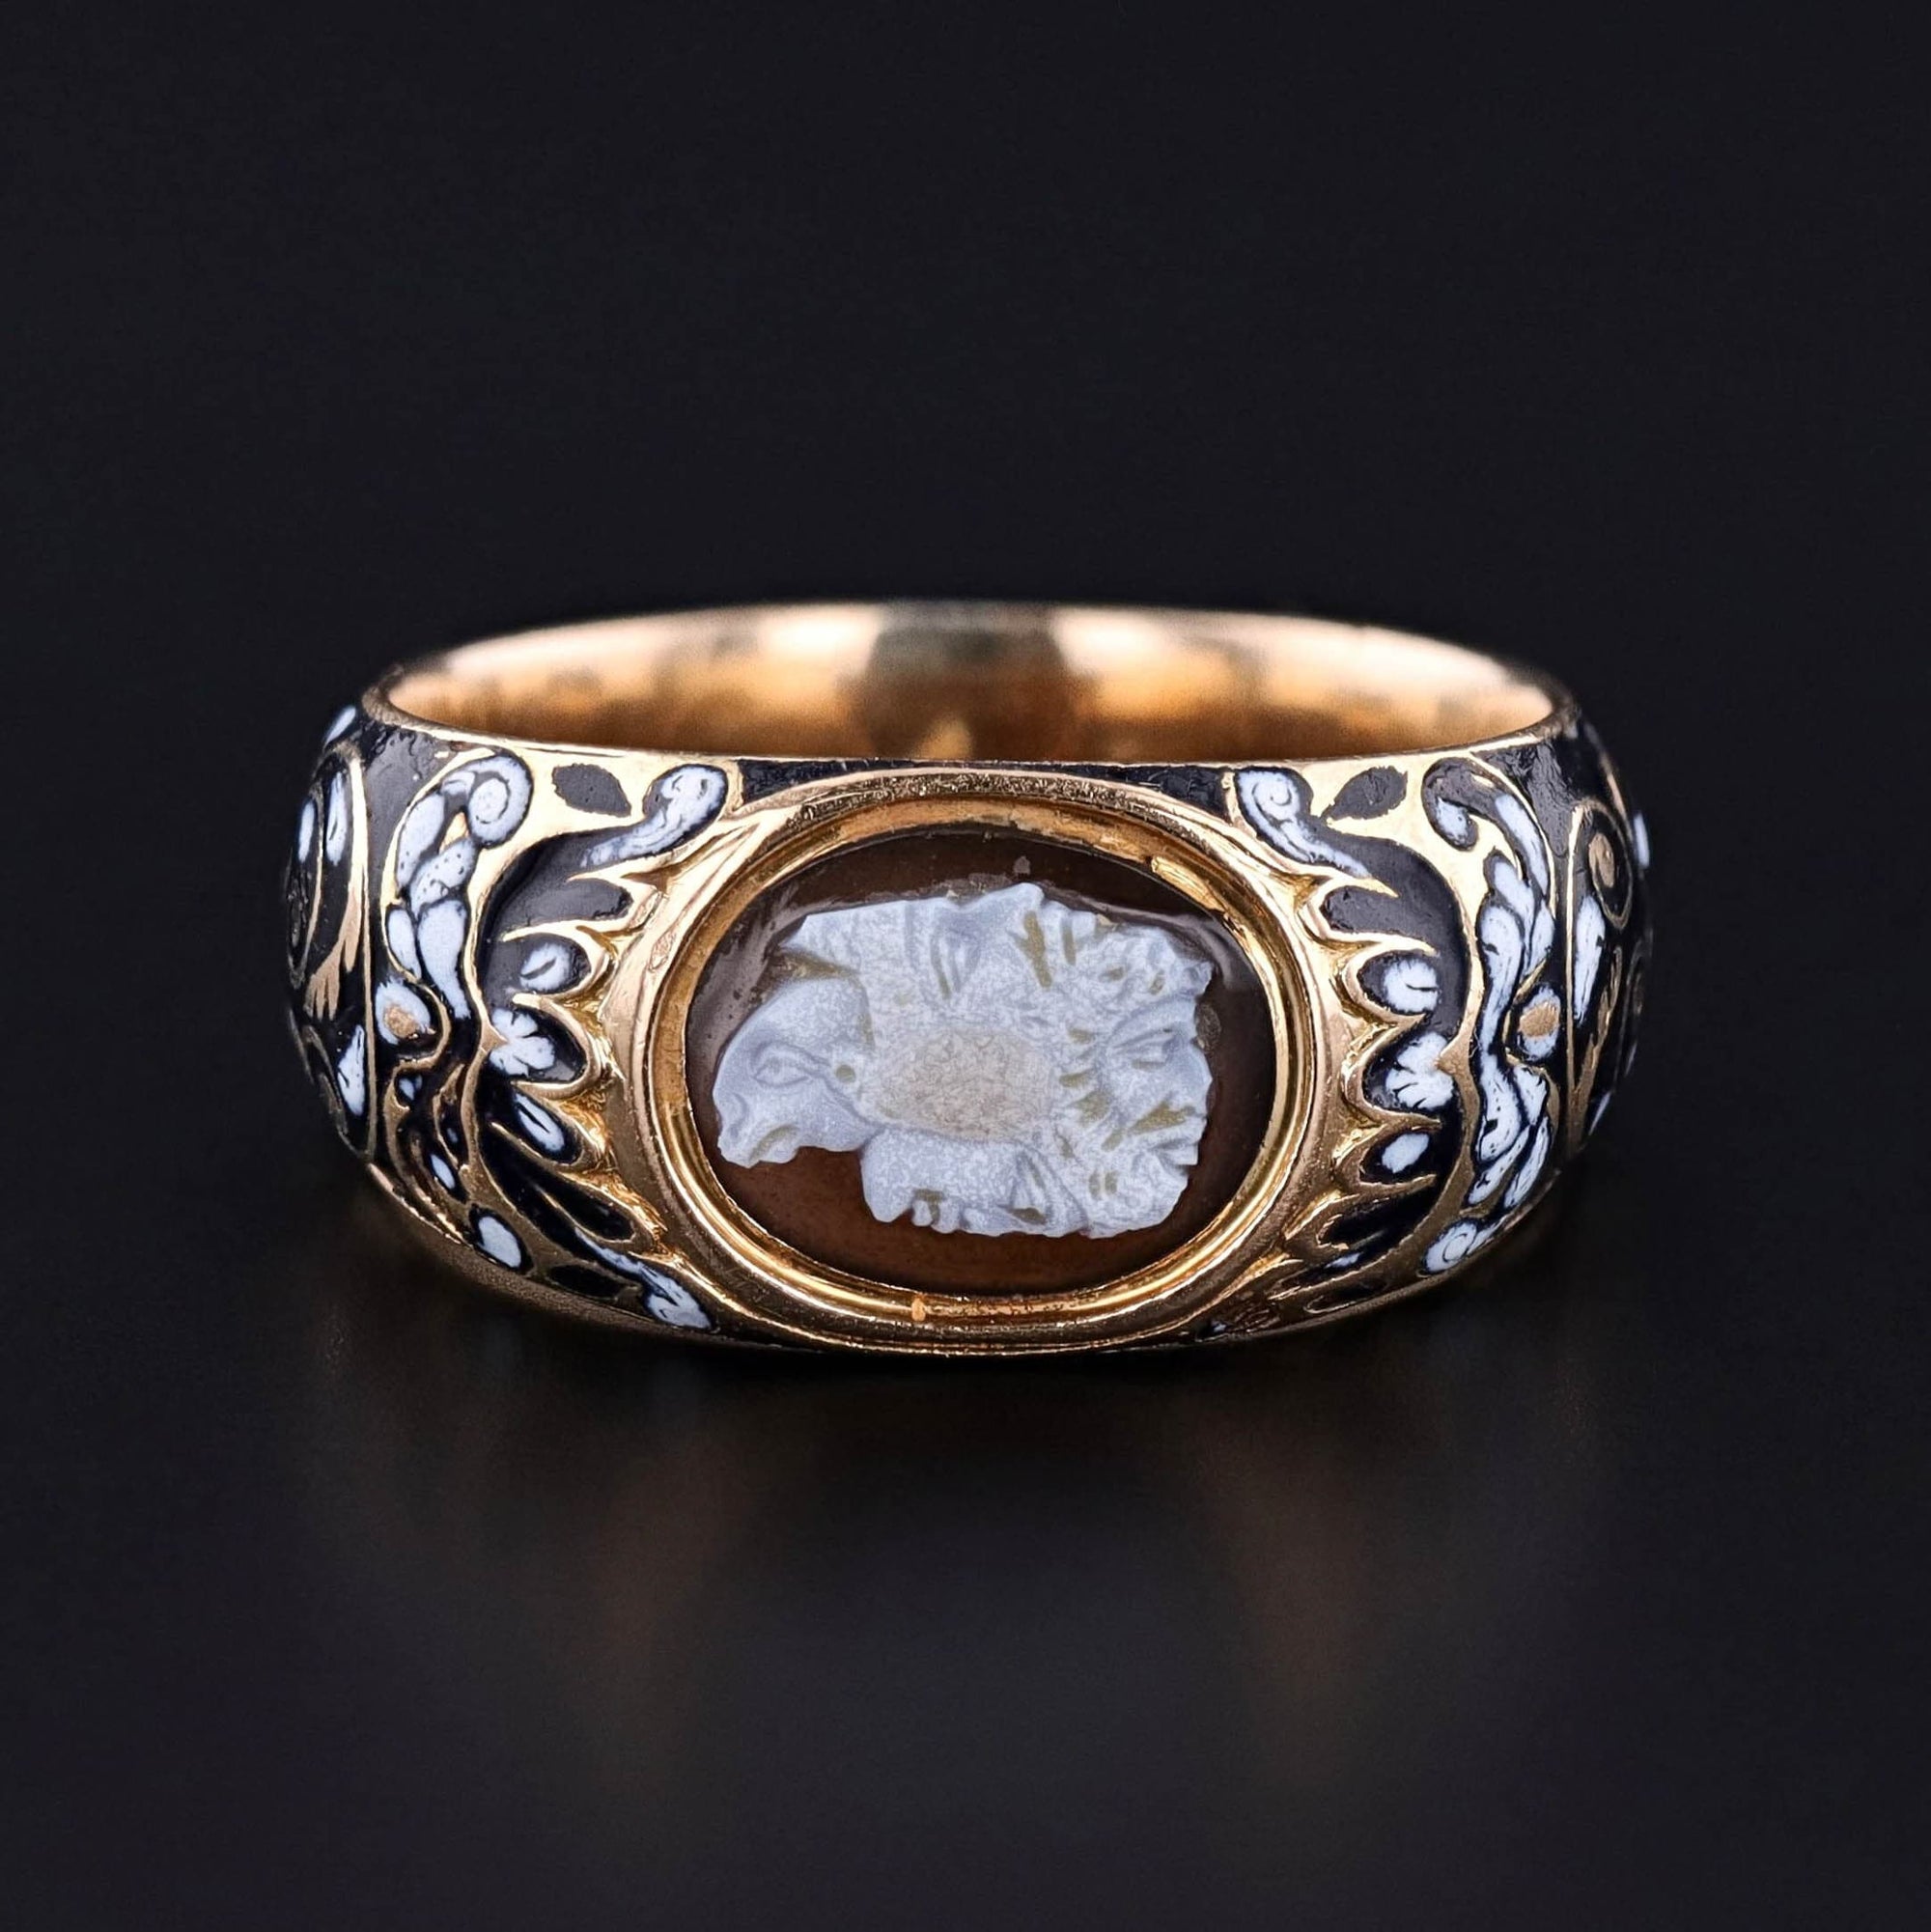 Explore the exquisite craftsmanship of this Renaissance revival ring (circa 1850), featuring a cameo of a gryllos, a multi-headed animal and human composite set in a substantial 18k gold mounting adorned with hand painted black and white enamel.